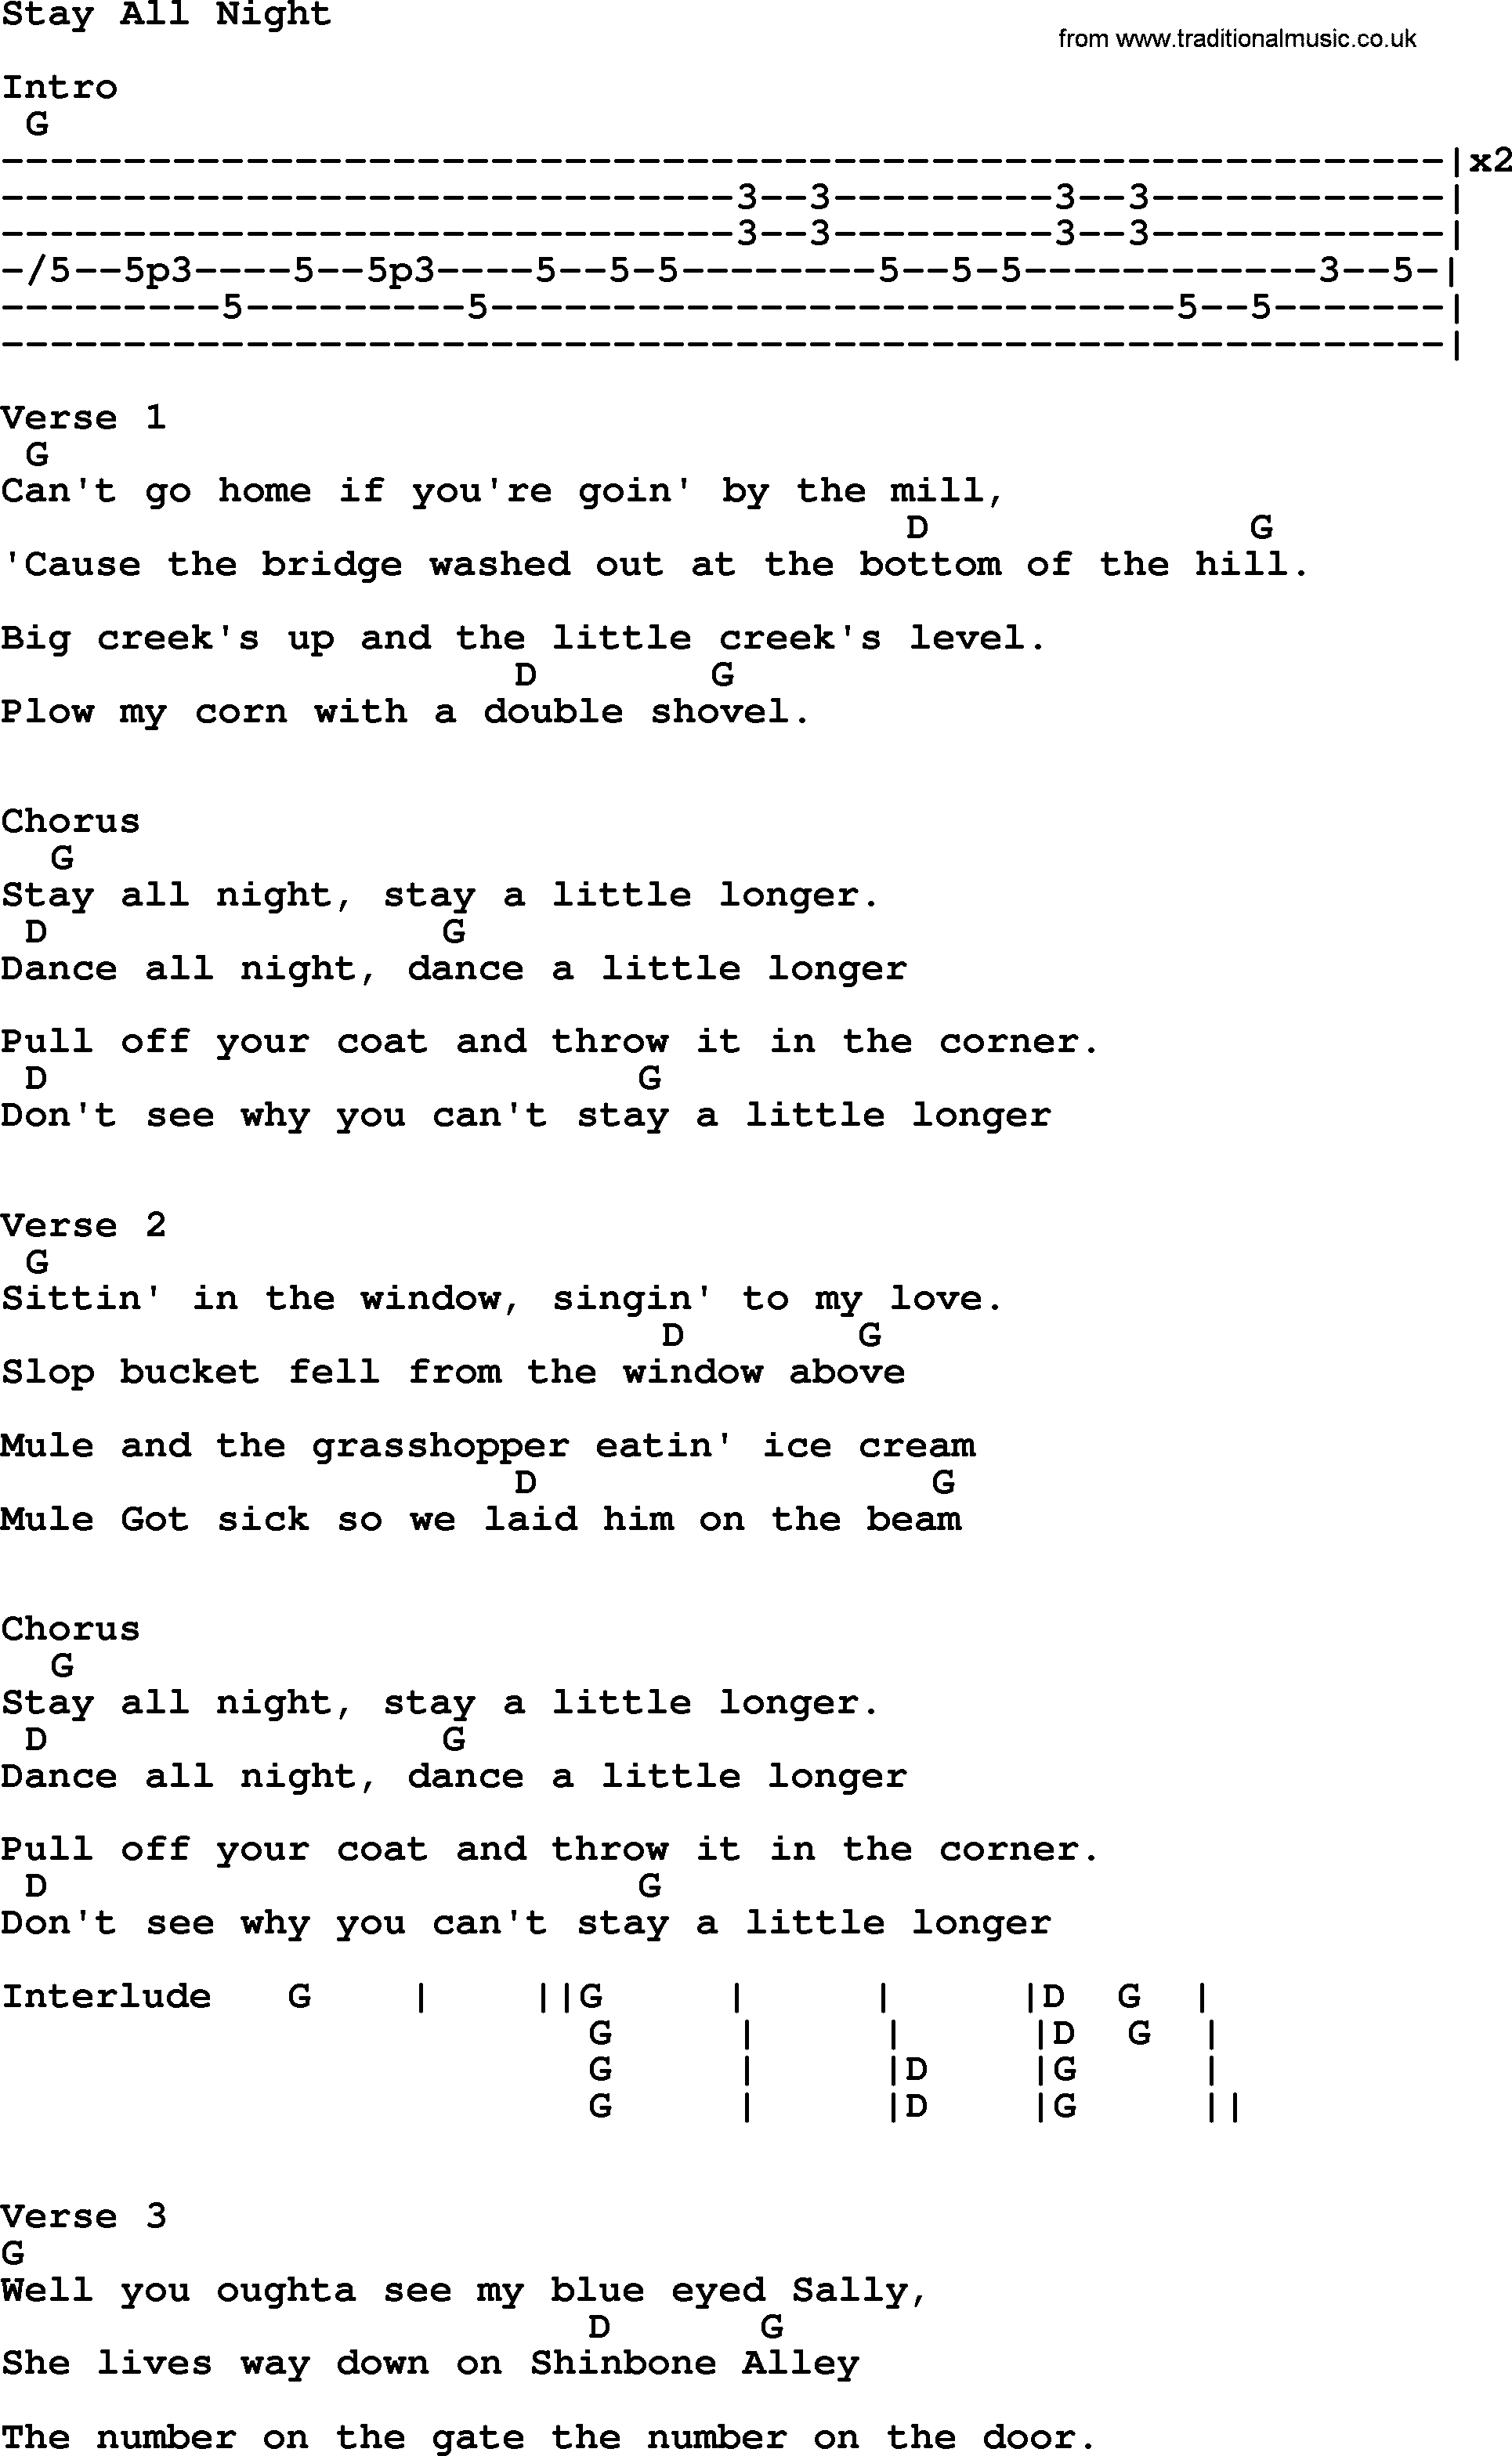 Willie Nelson song: Stay All Night, lyrics and chords